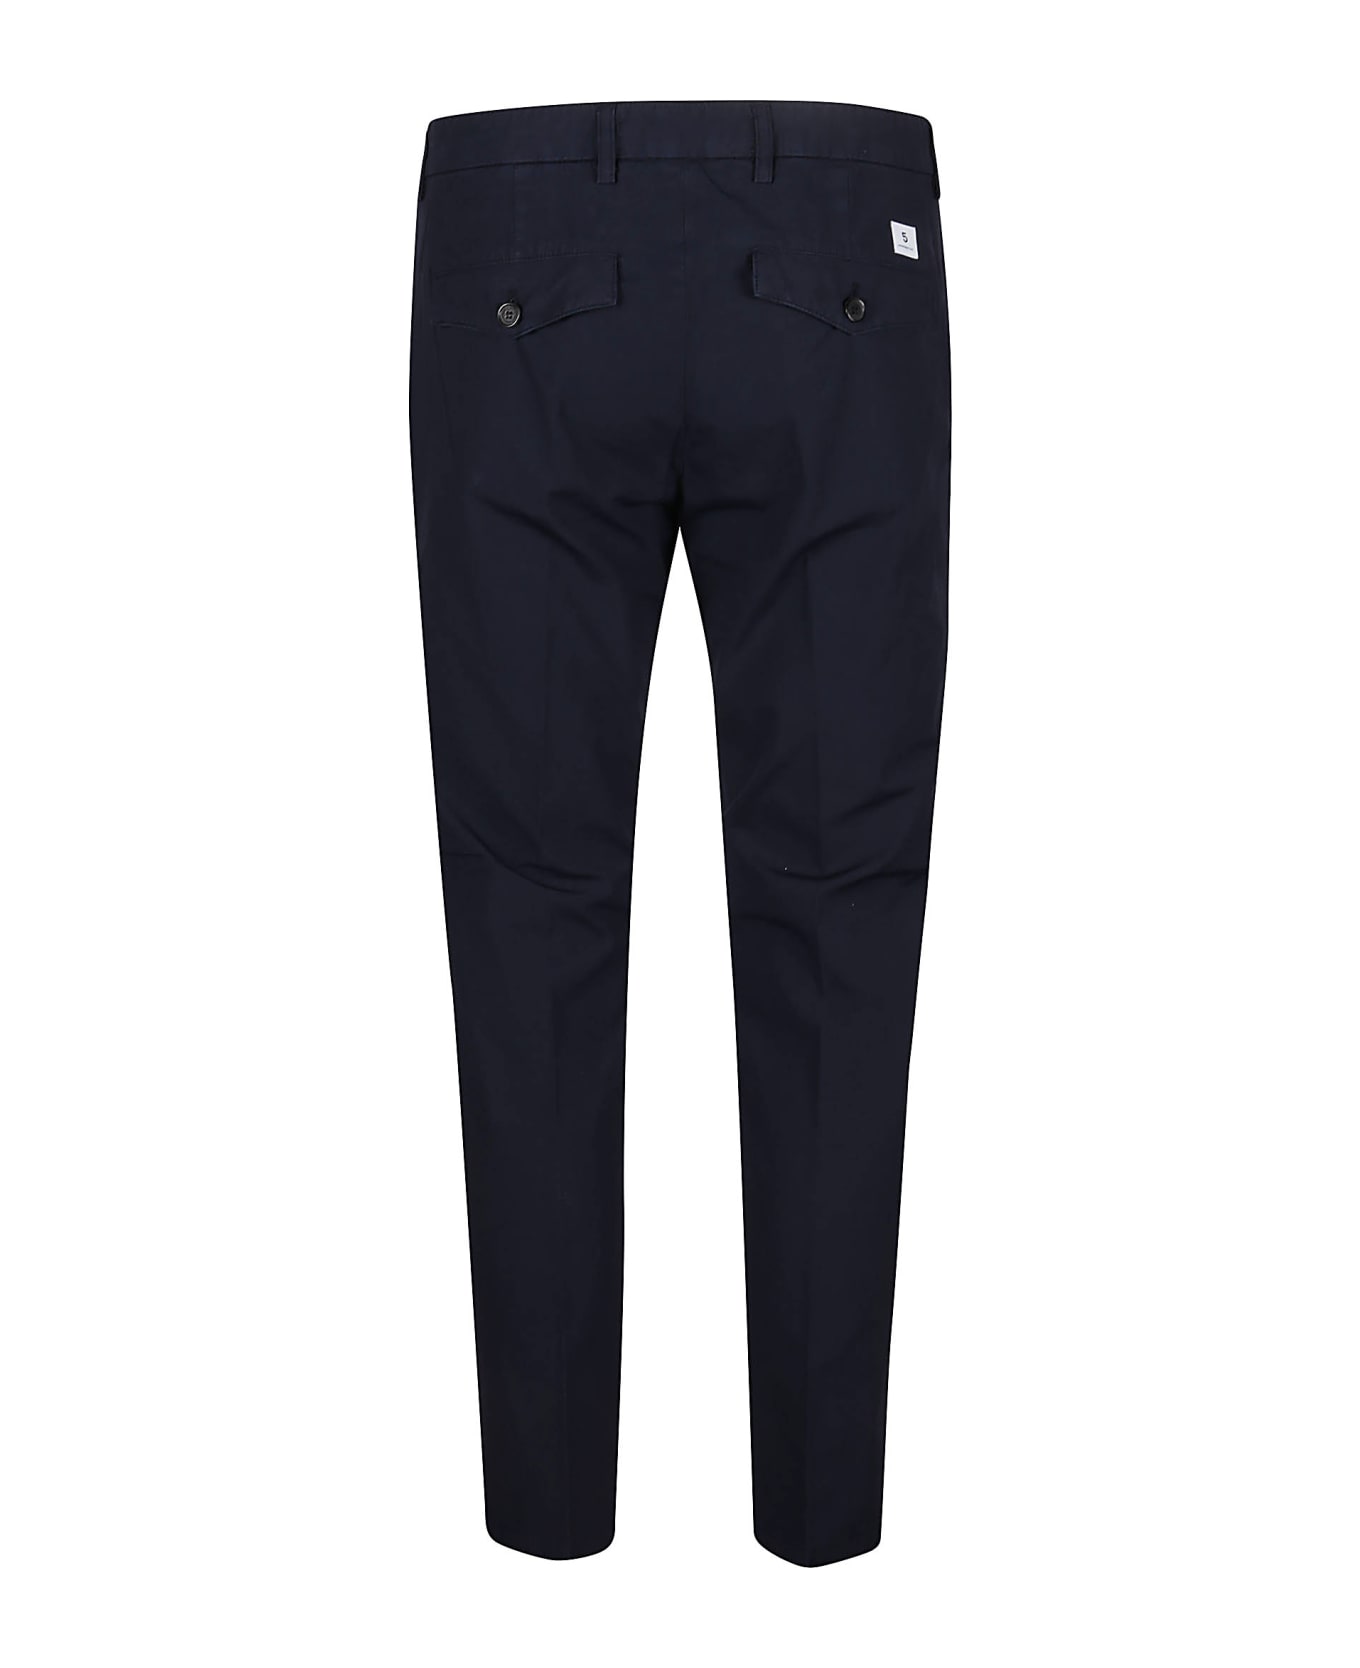 Department Five Prince Pences Chinos Pant - Navy